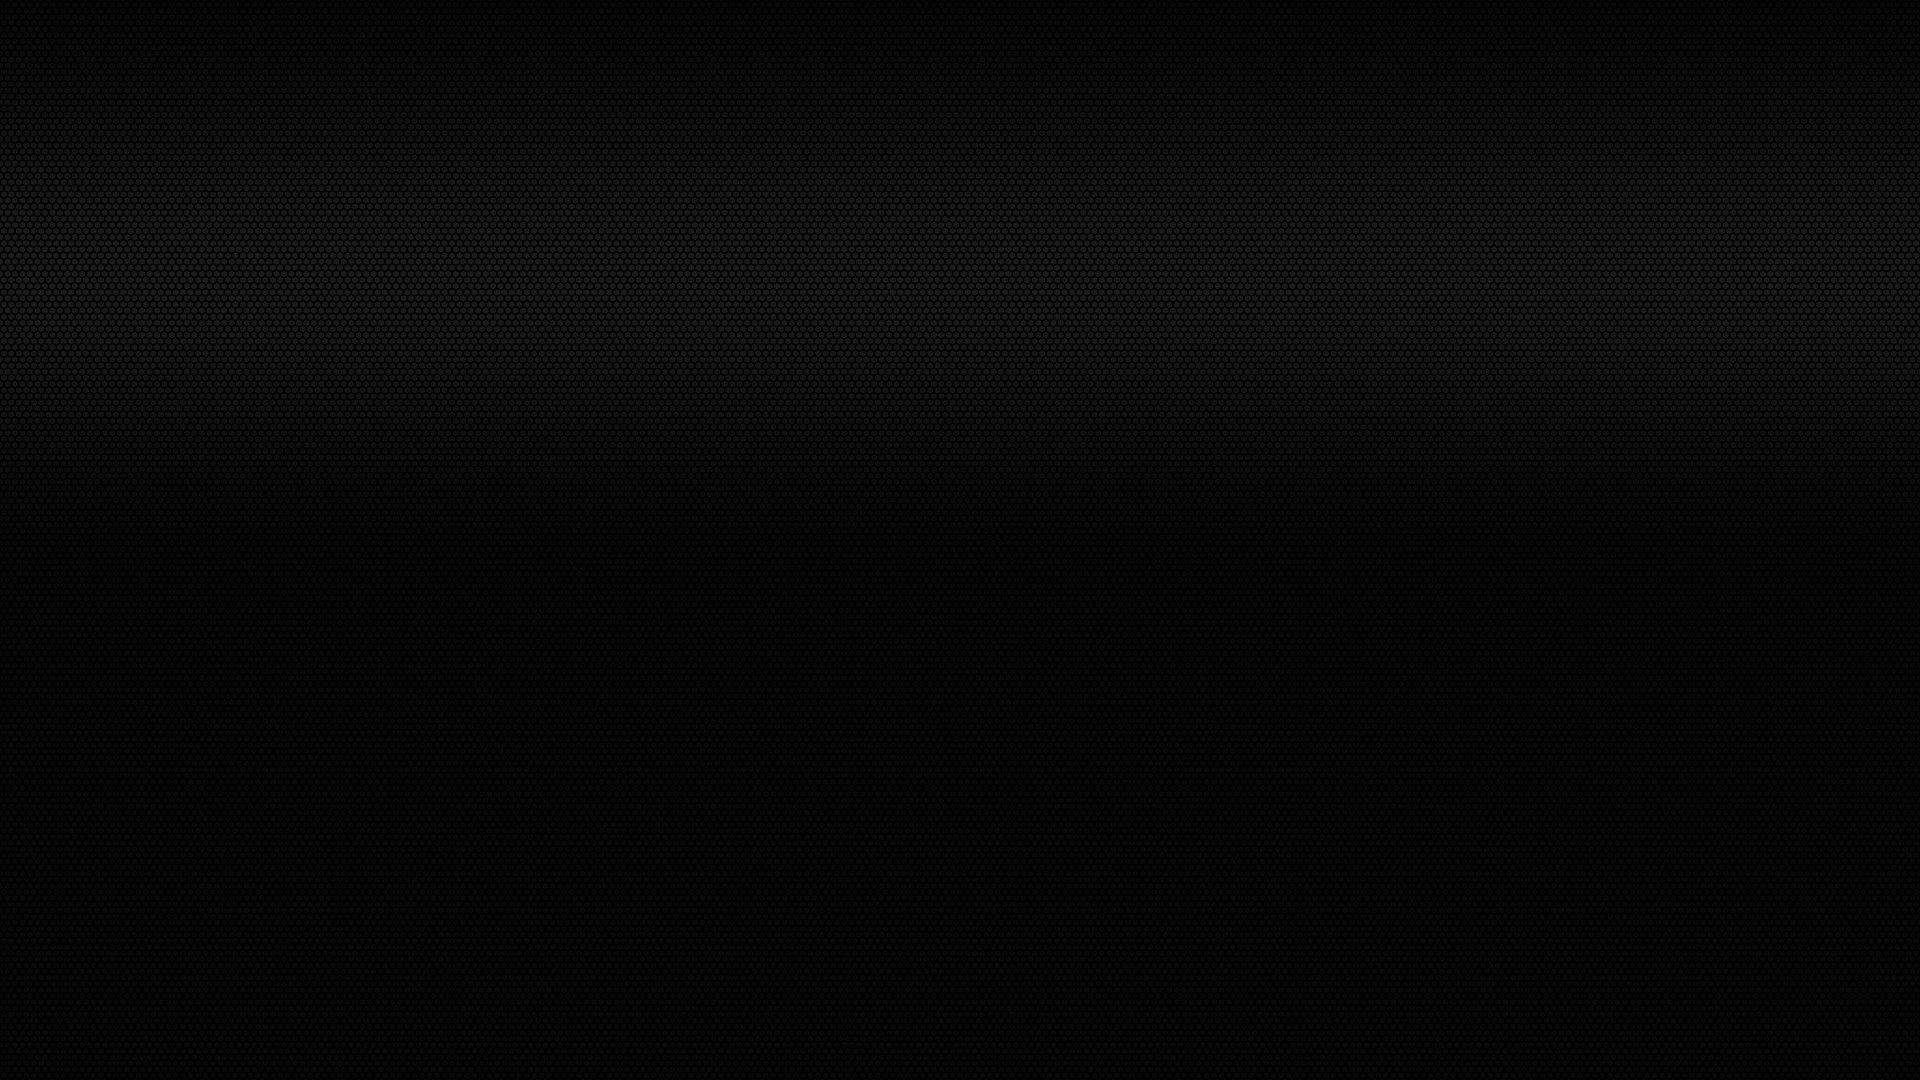 1920x1080 Amoled Pure Black Wallpapers